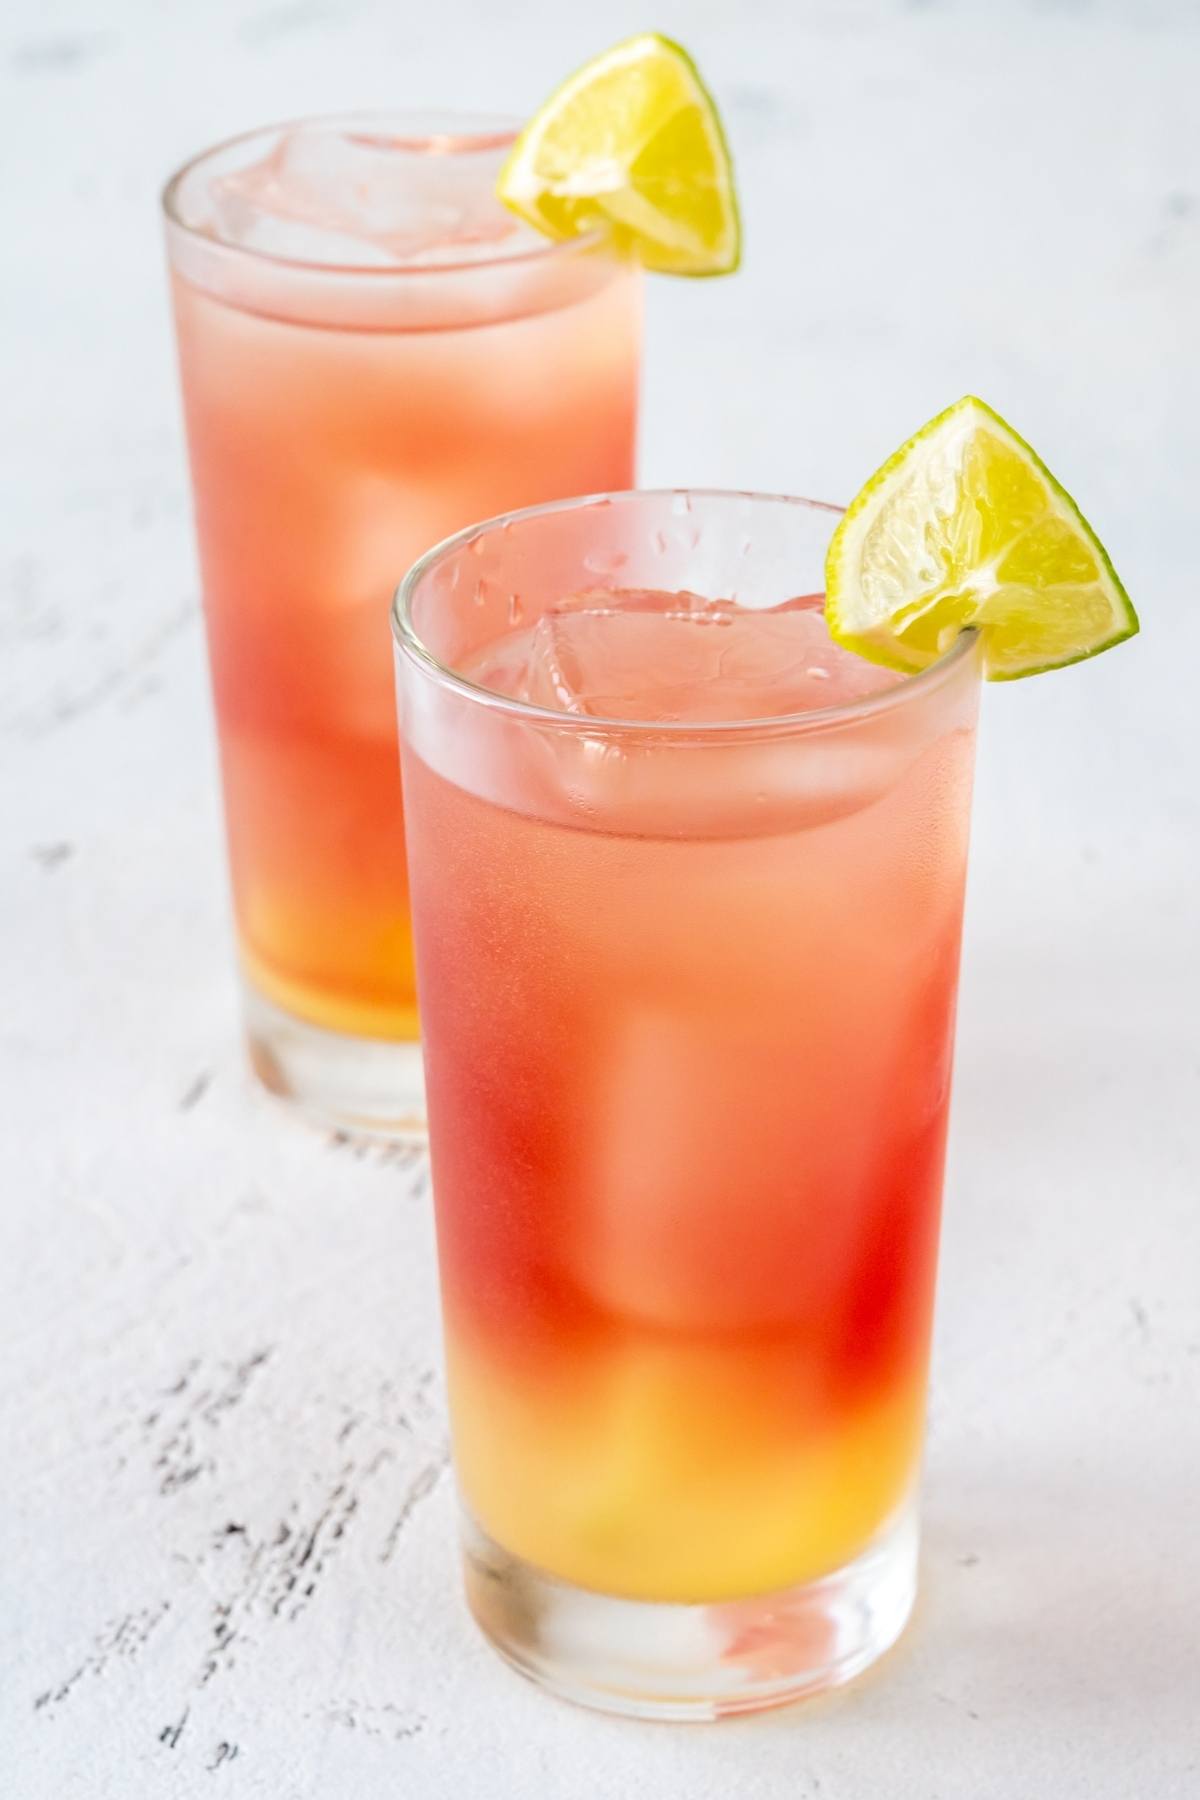 Celebrate the summer with this refreshing Malibu Bay Breeze cocktail. It’s a delicious combination of Malibu rum, cranberry juice, and pineapple juice.